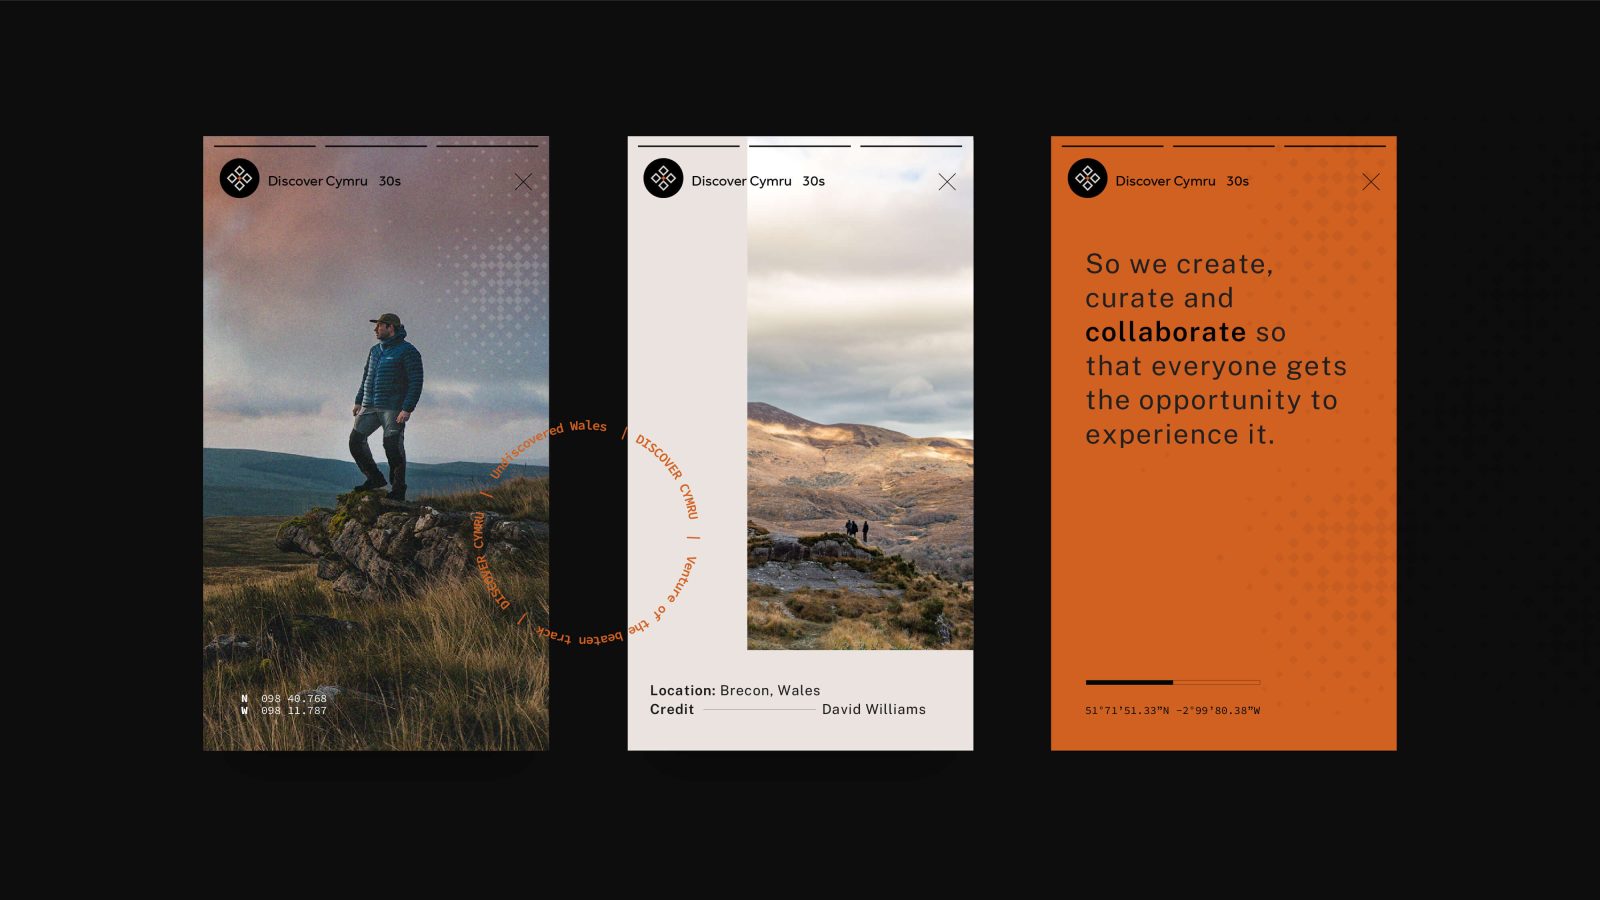 Three smartphone screens showcasing a website design about travel; first screen displays a man standing on a rocky hill with text overlay, second screen features a close-up text detail, and third shows a scenic landscape with